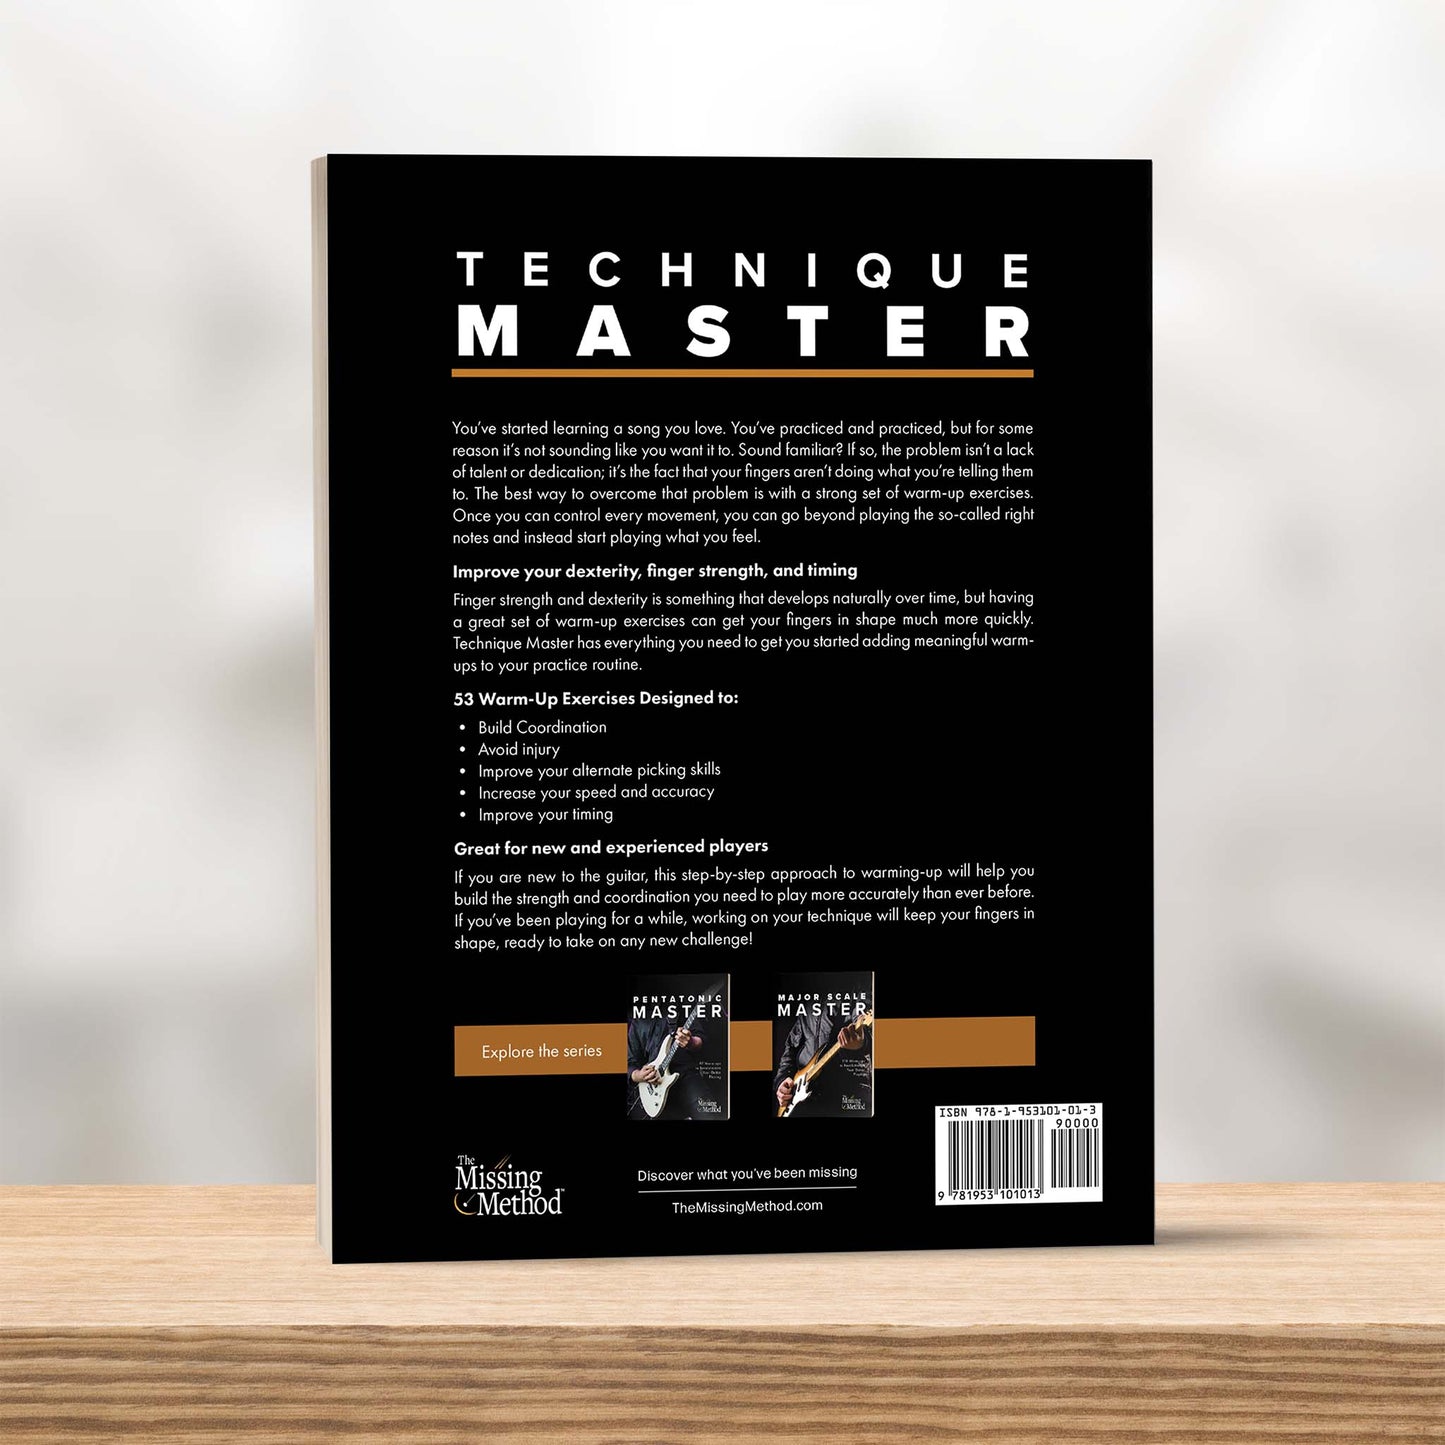 Technique Master from The Missing Method for Guitar. Image of book on table, displaying the back cover.